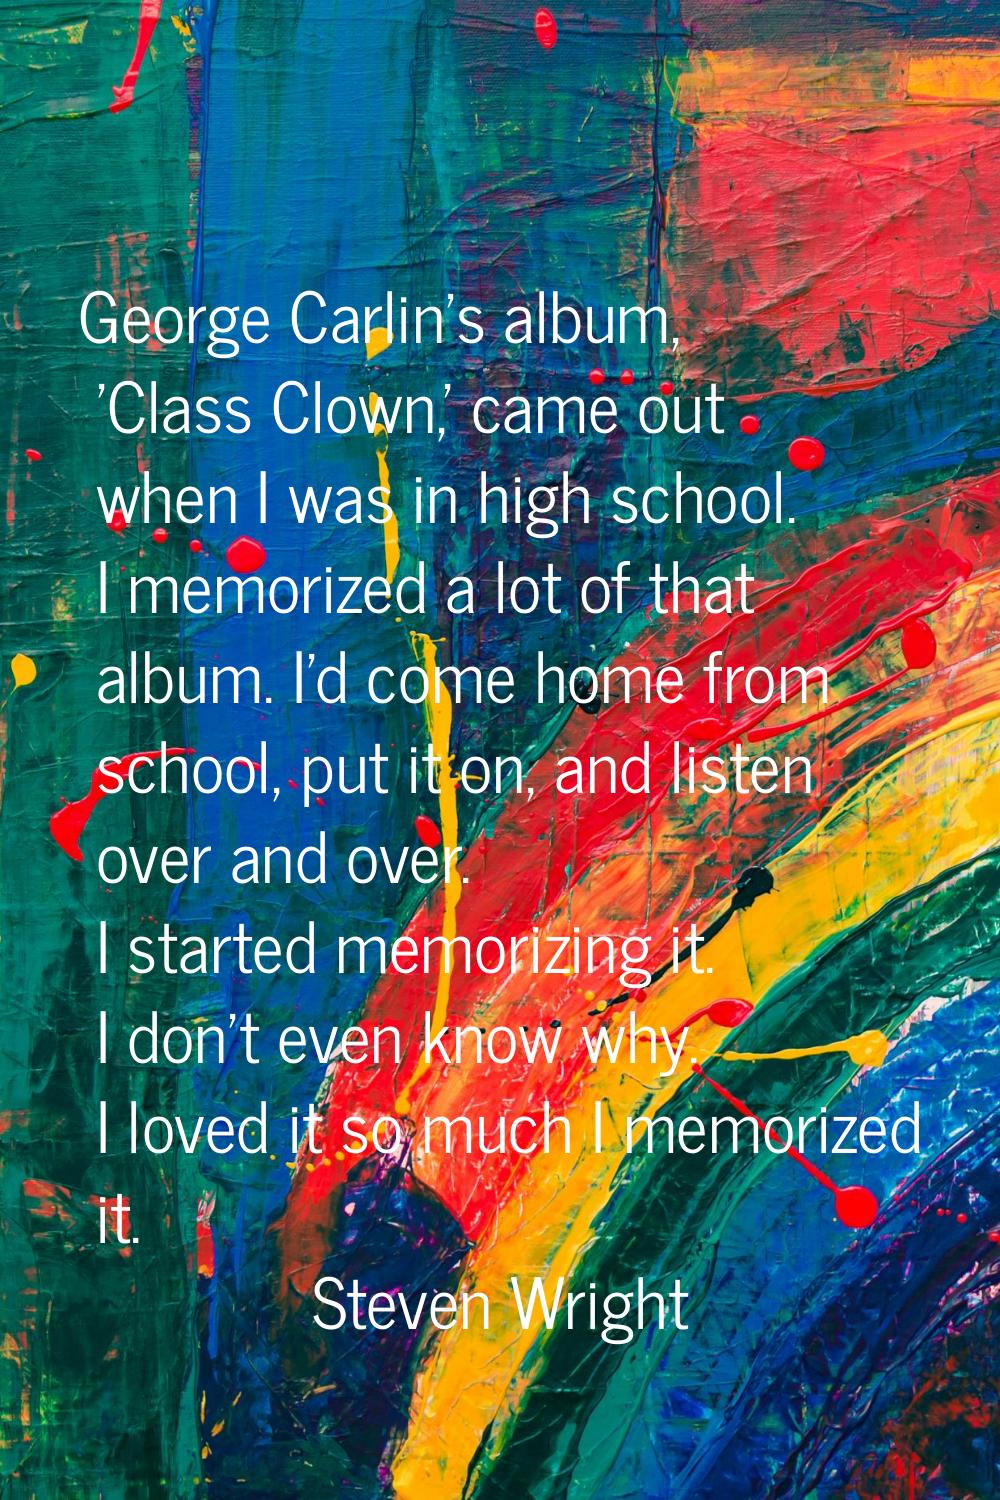 George Carlin's album, 'Class Clown,' came out when I was in high school. I memorized a lot of that